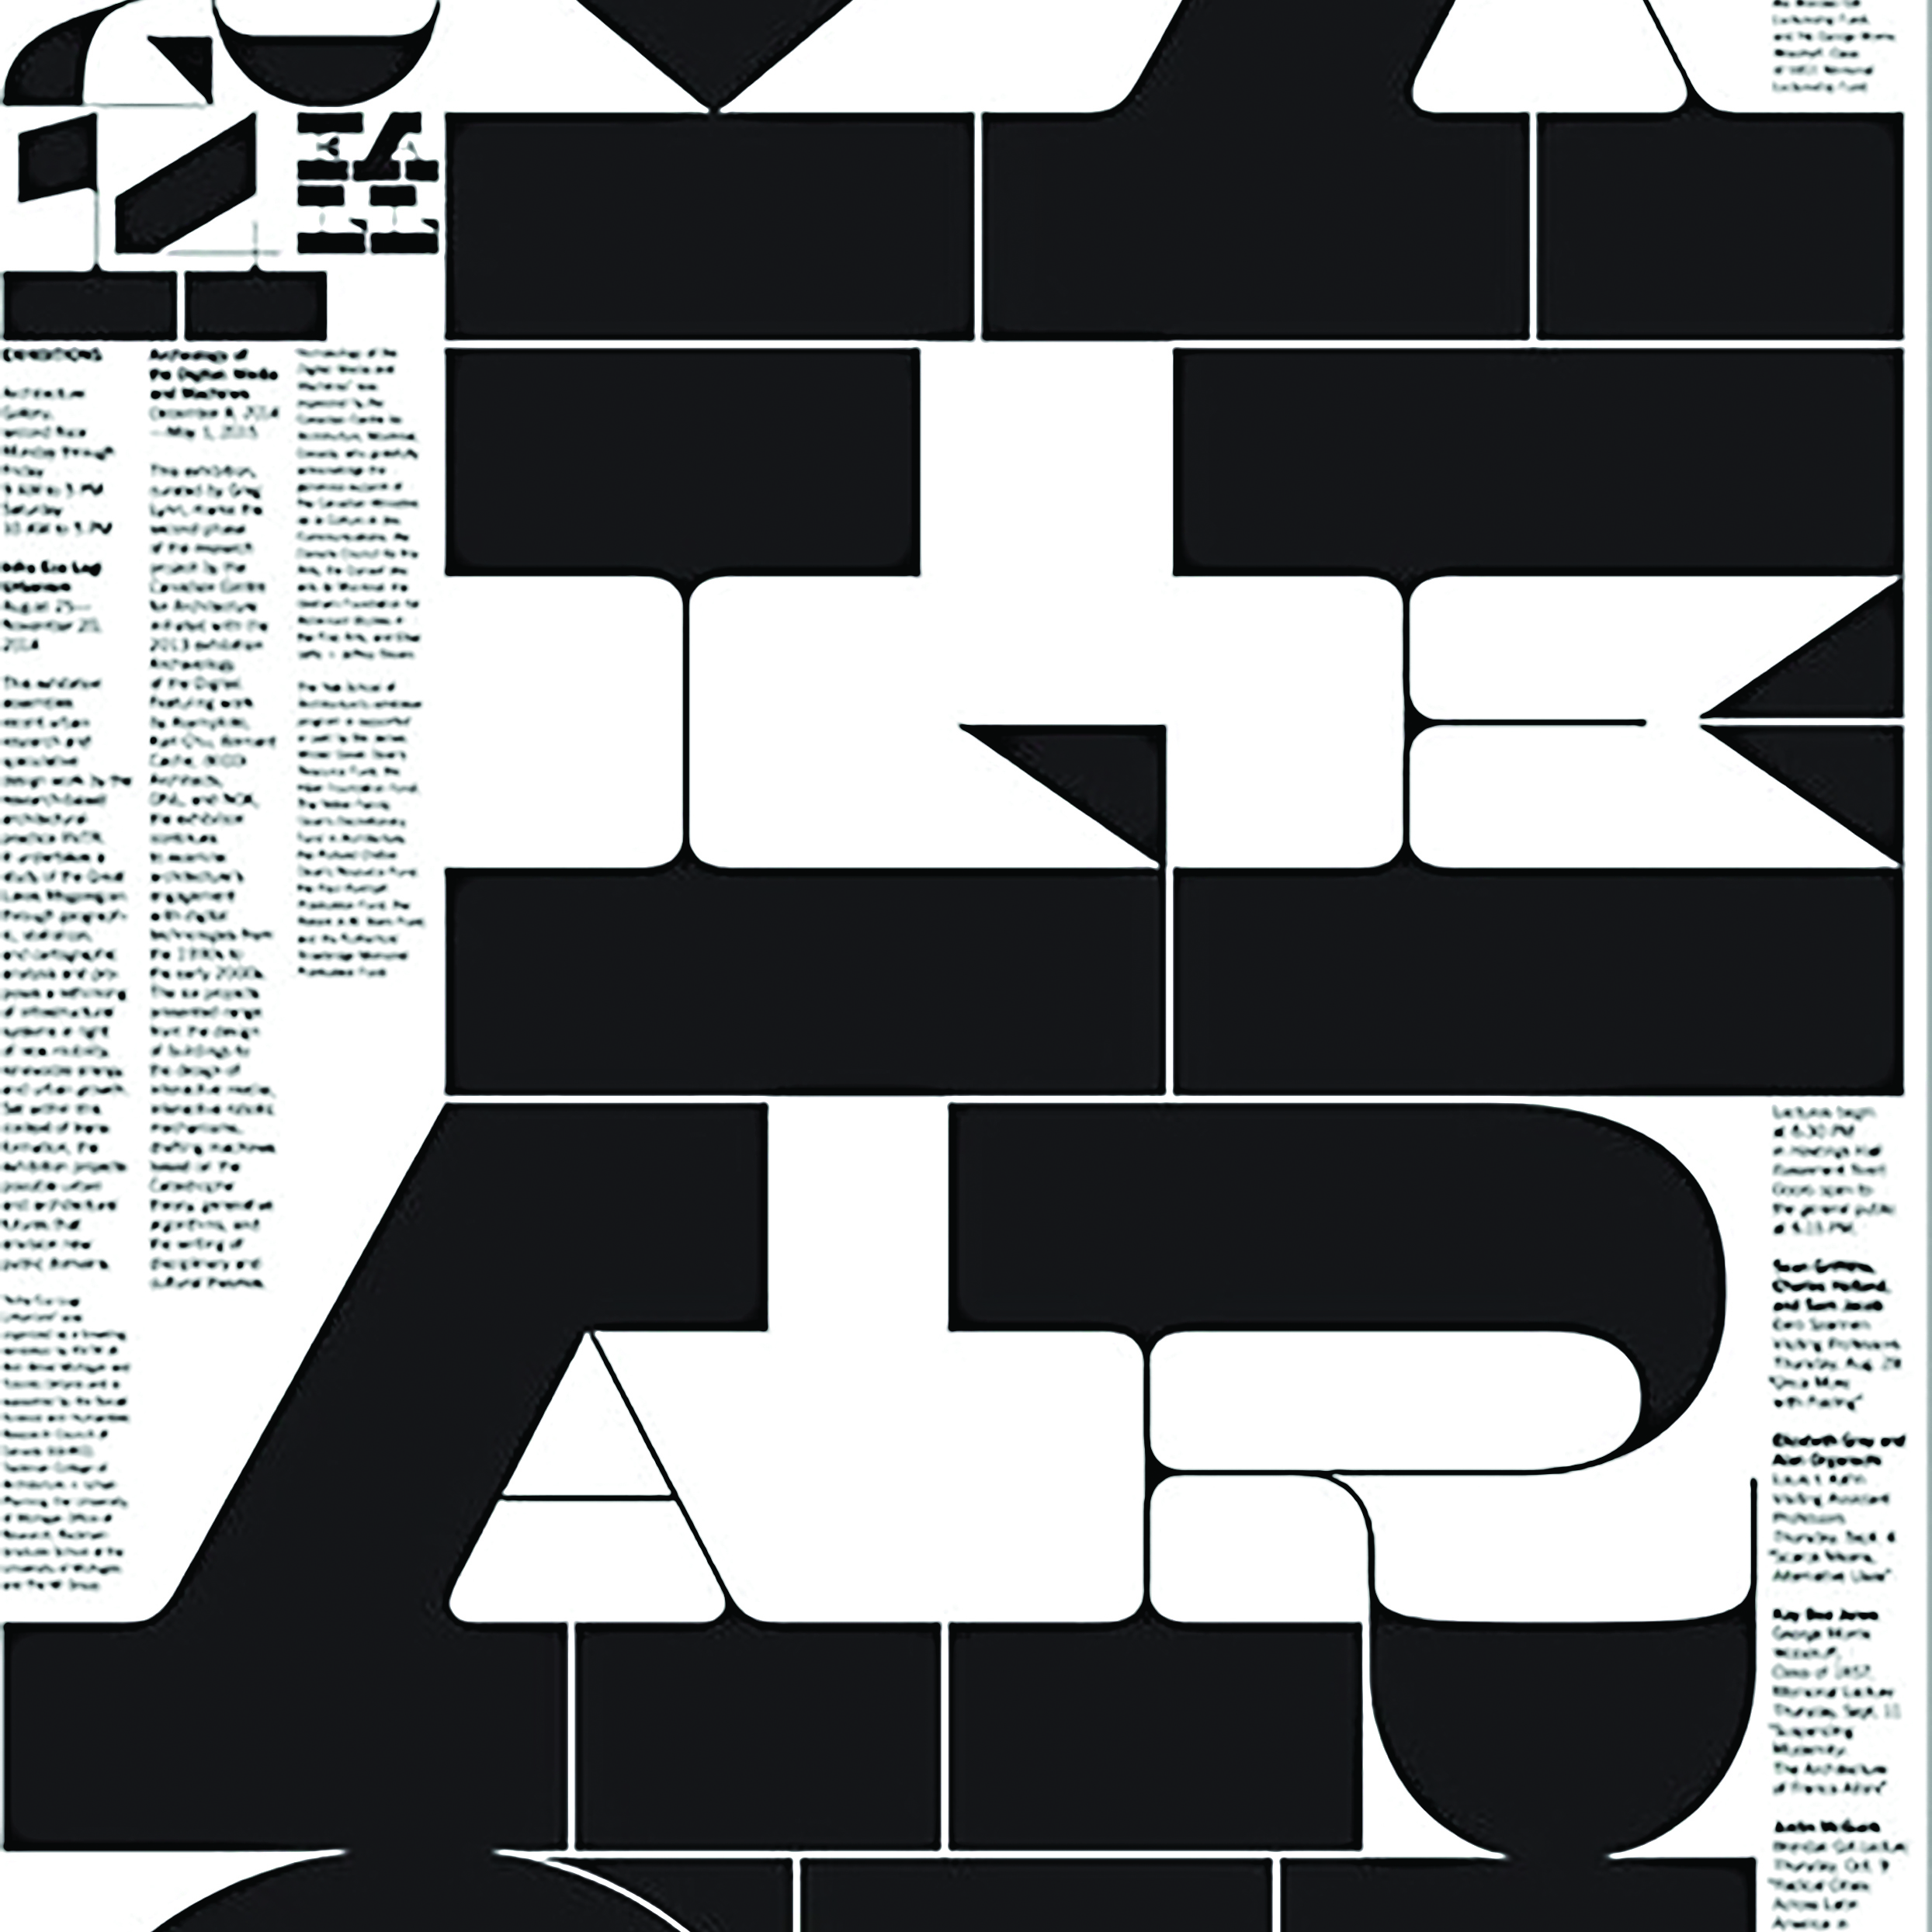 image of Yale Architecture poster